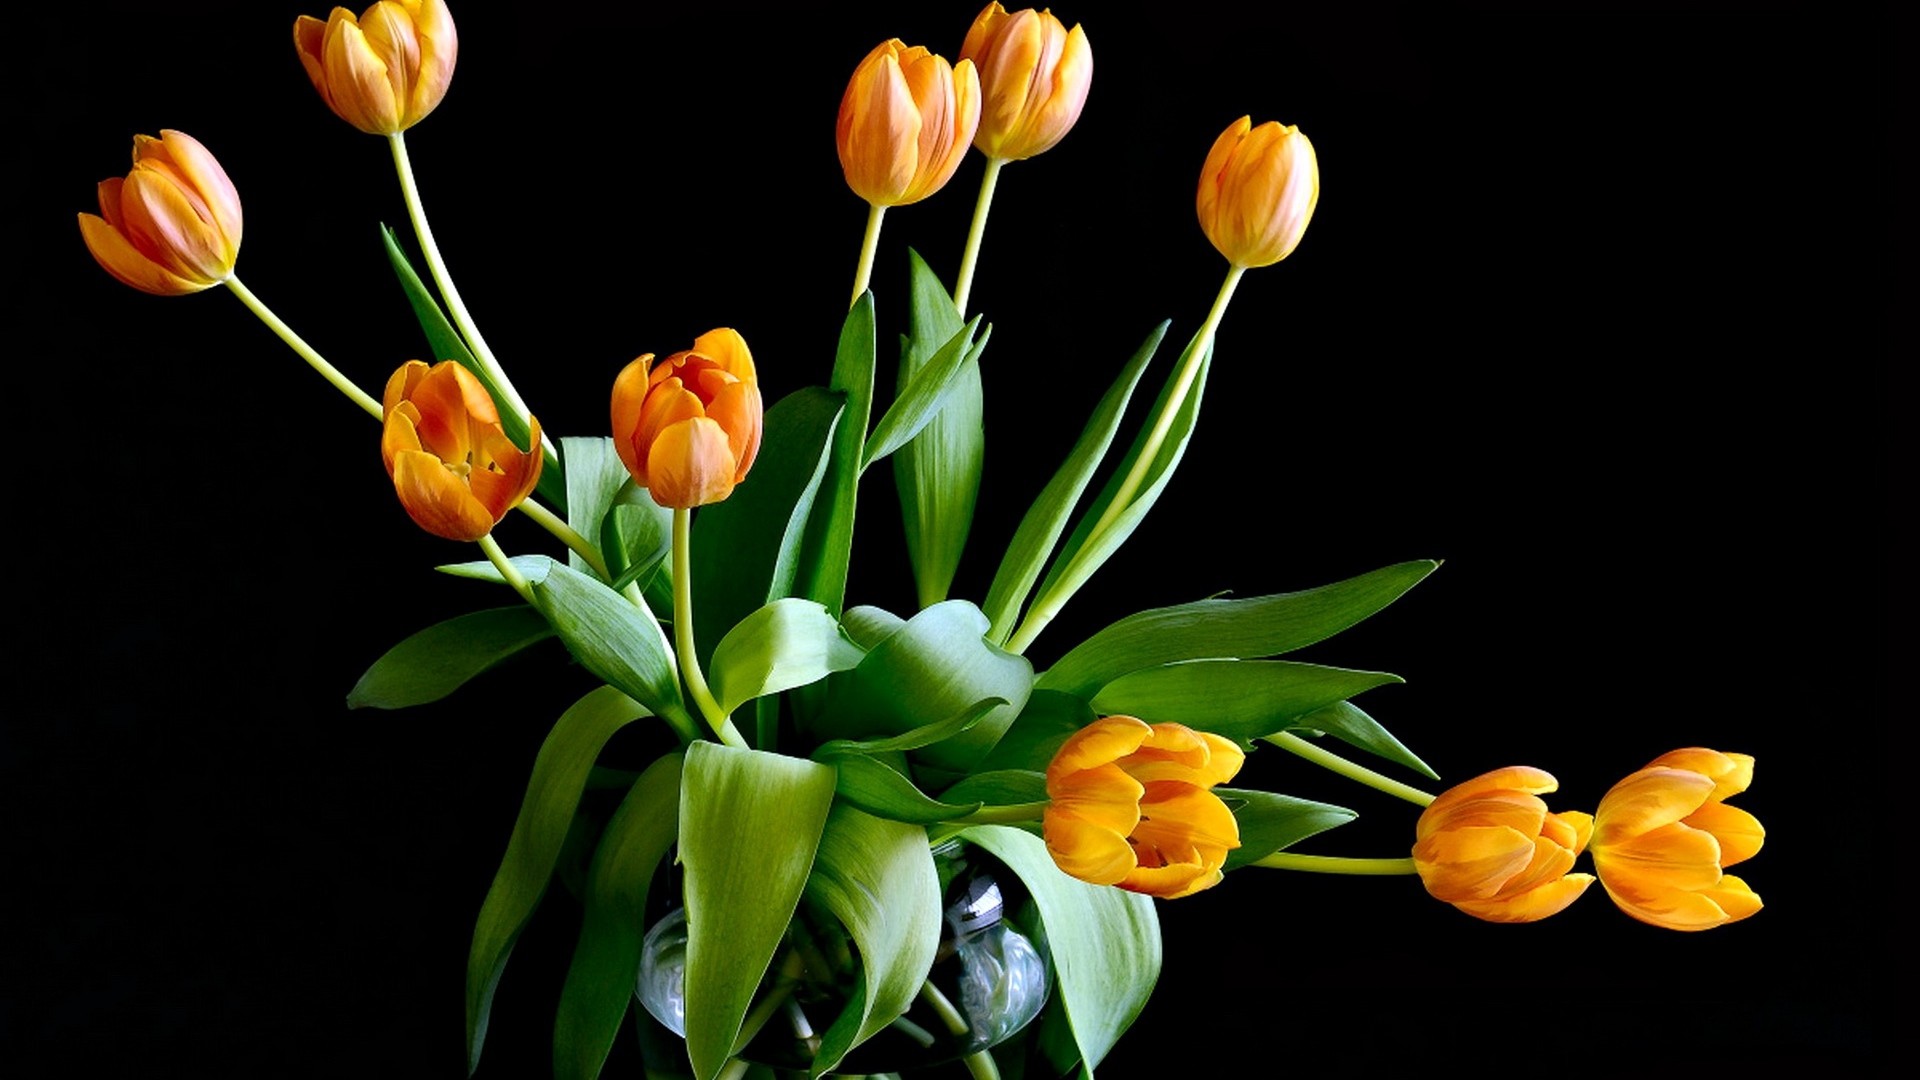 1920x1080 Get the latest tulips, flowers, leaves news, pictures and videos and learn  all about tulips, flowers, leaves from wallpapers4u.org, your wallpaper  news ...